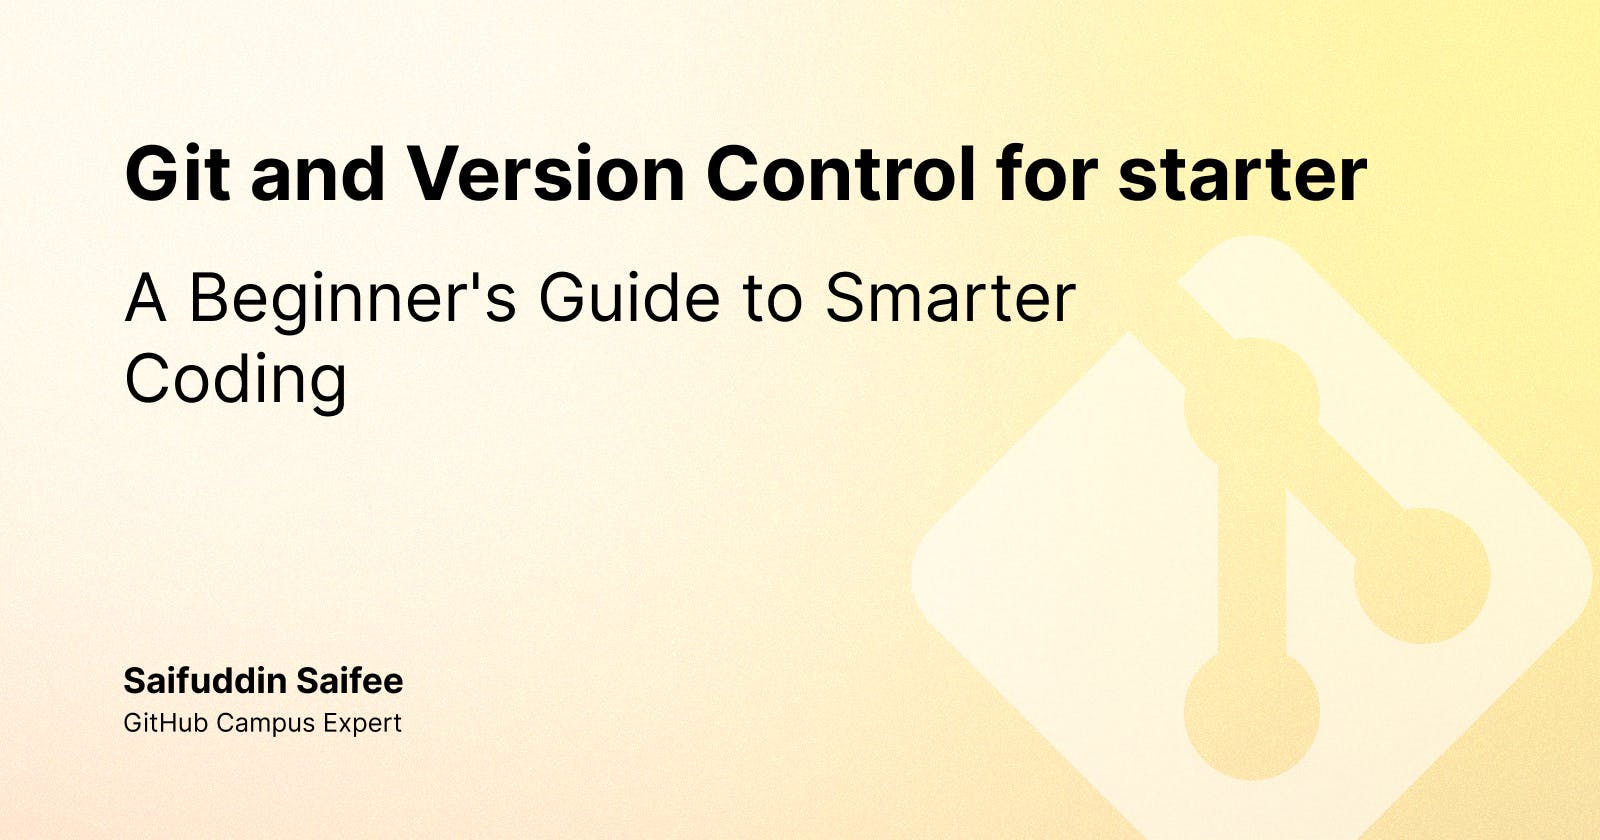 Git and Version Control: A Beginner's Guide to Smarter Coding